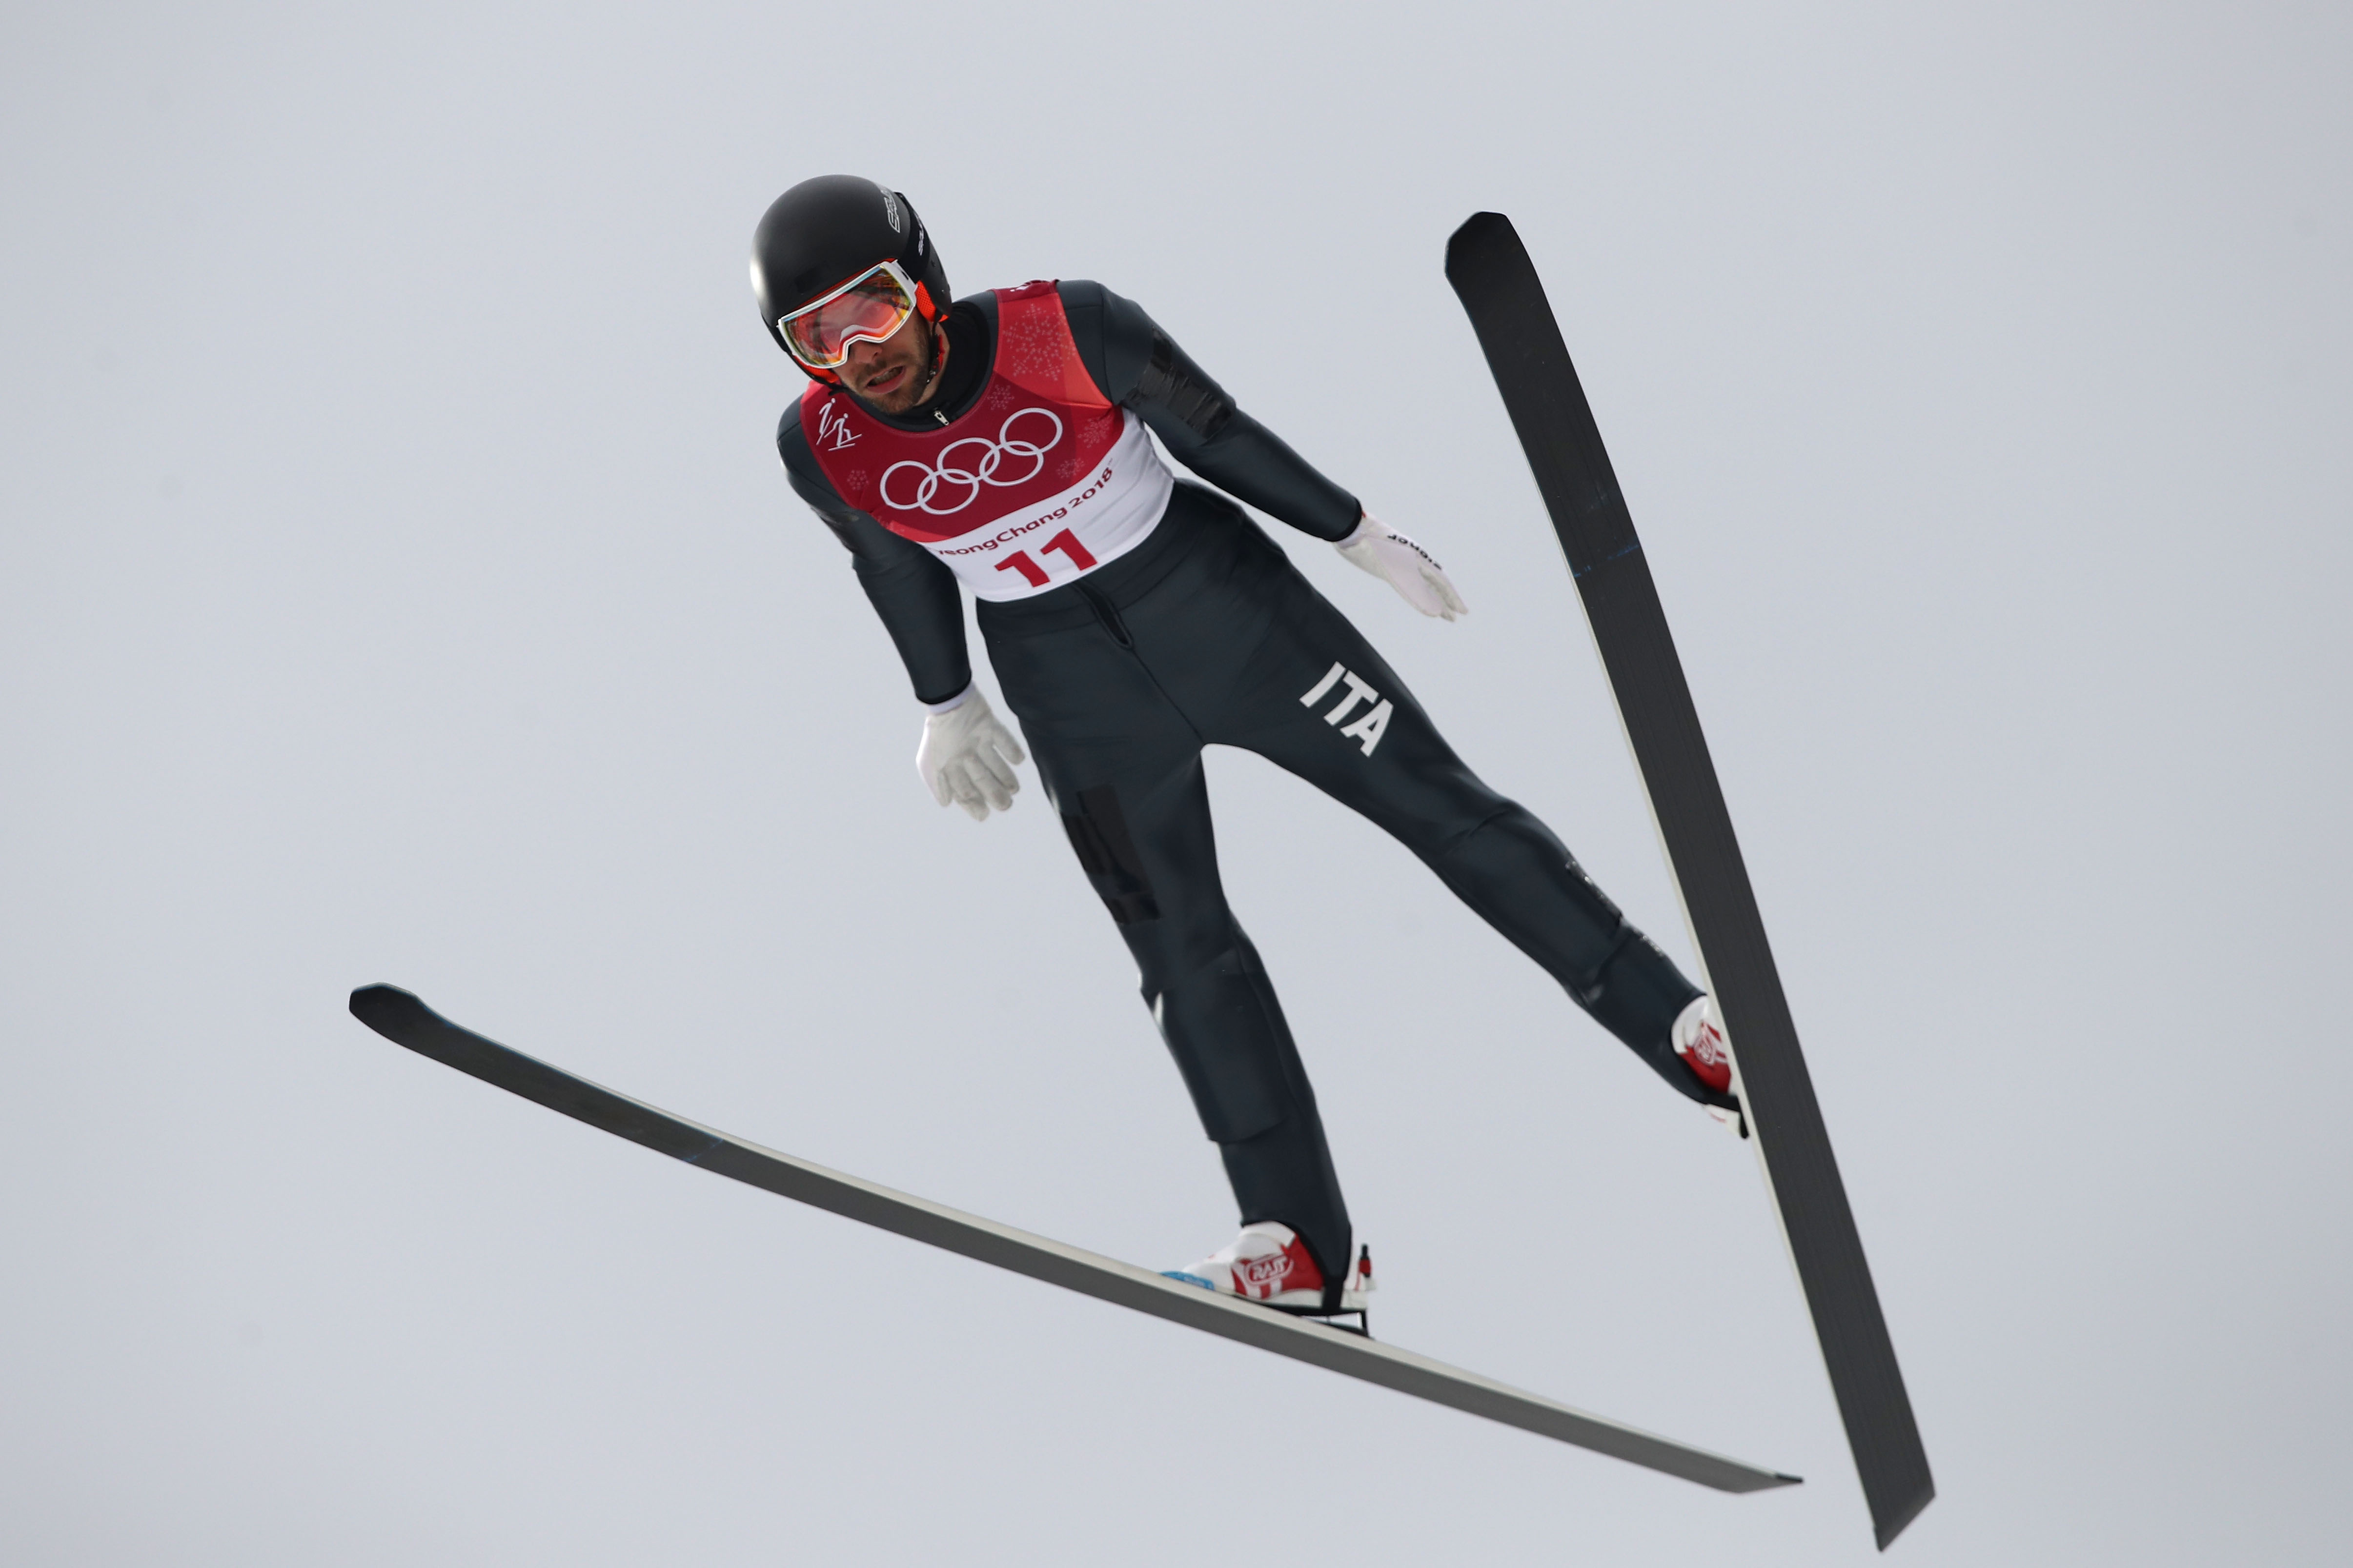 PYEONGCHANG-GUN, SOUTH KOREA - FEBRUARY 14: Raffaele Buzzi of Italy makes a trial jump during the Nordic Combined Individual Gundersen Normal Hill and 10km Cross Country on day five of the PyeongChang 2018 Winter Olympics at Alpensia Cross-Country Centre on February 14, 2018 in Pyeongchang-gun, South Korea. (Photo by Clive Mason/Getty Images)